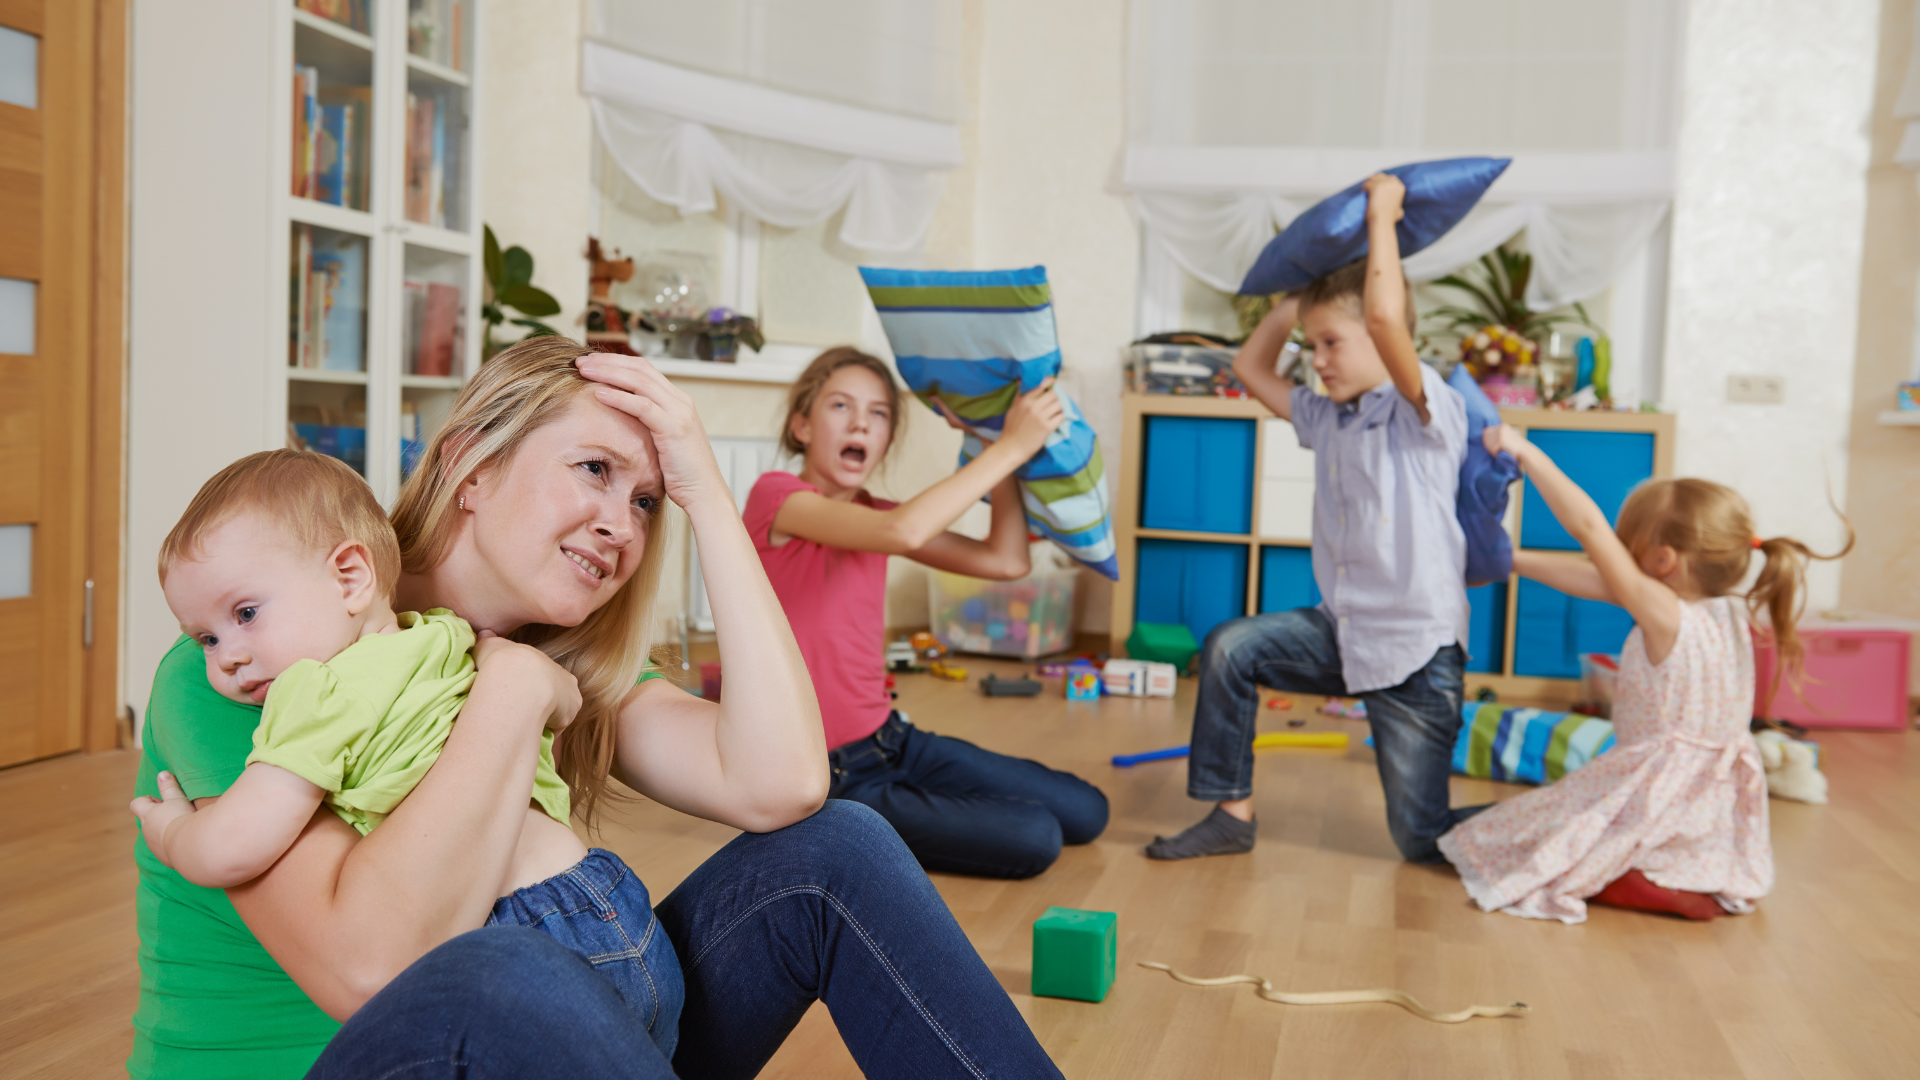 Top 10 Natural Ways to Change Your Childs Behavior